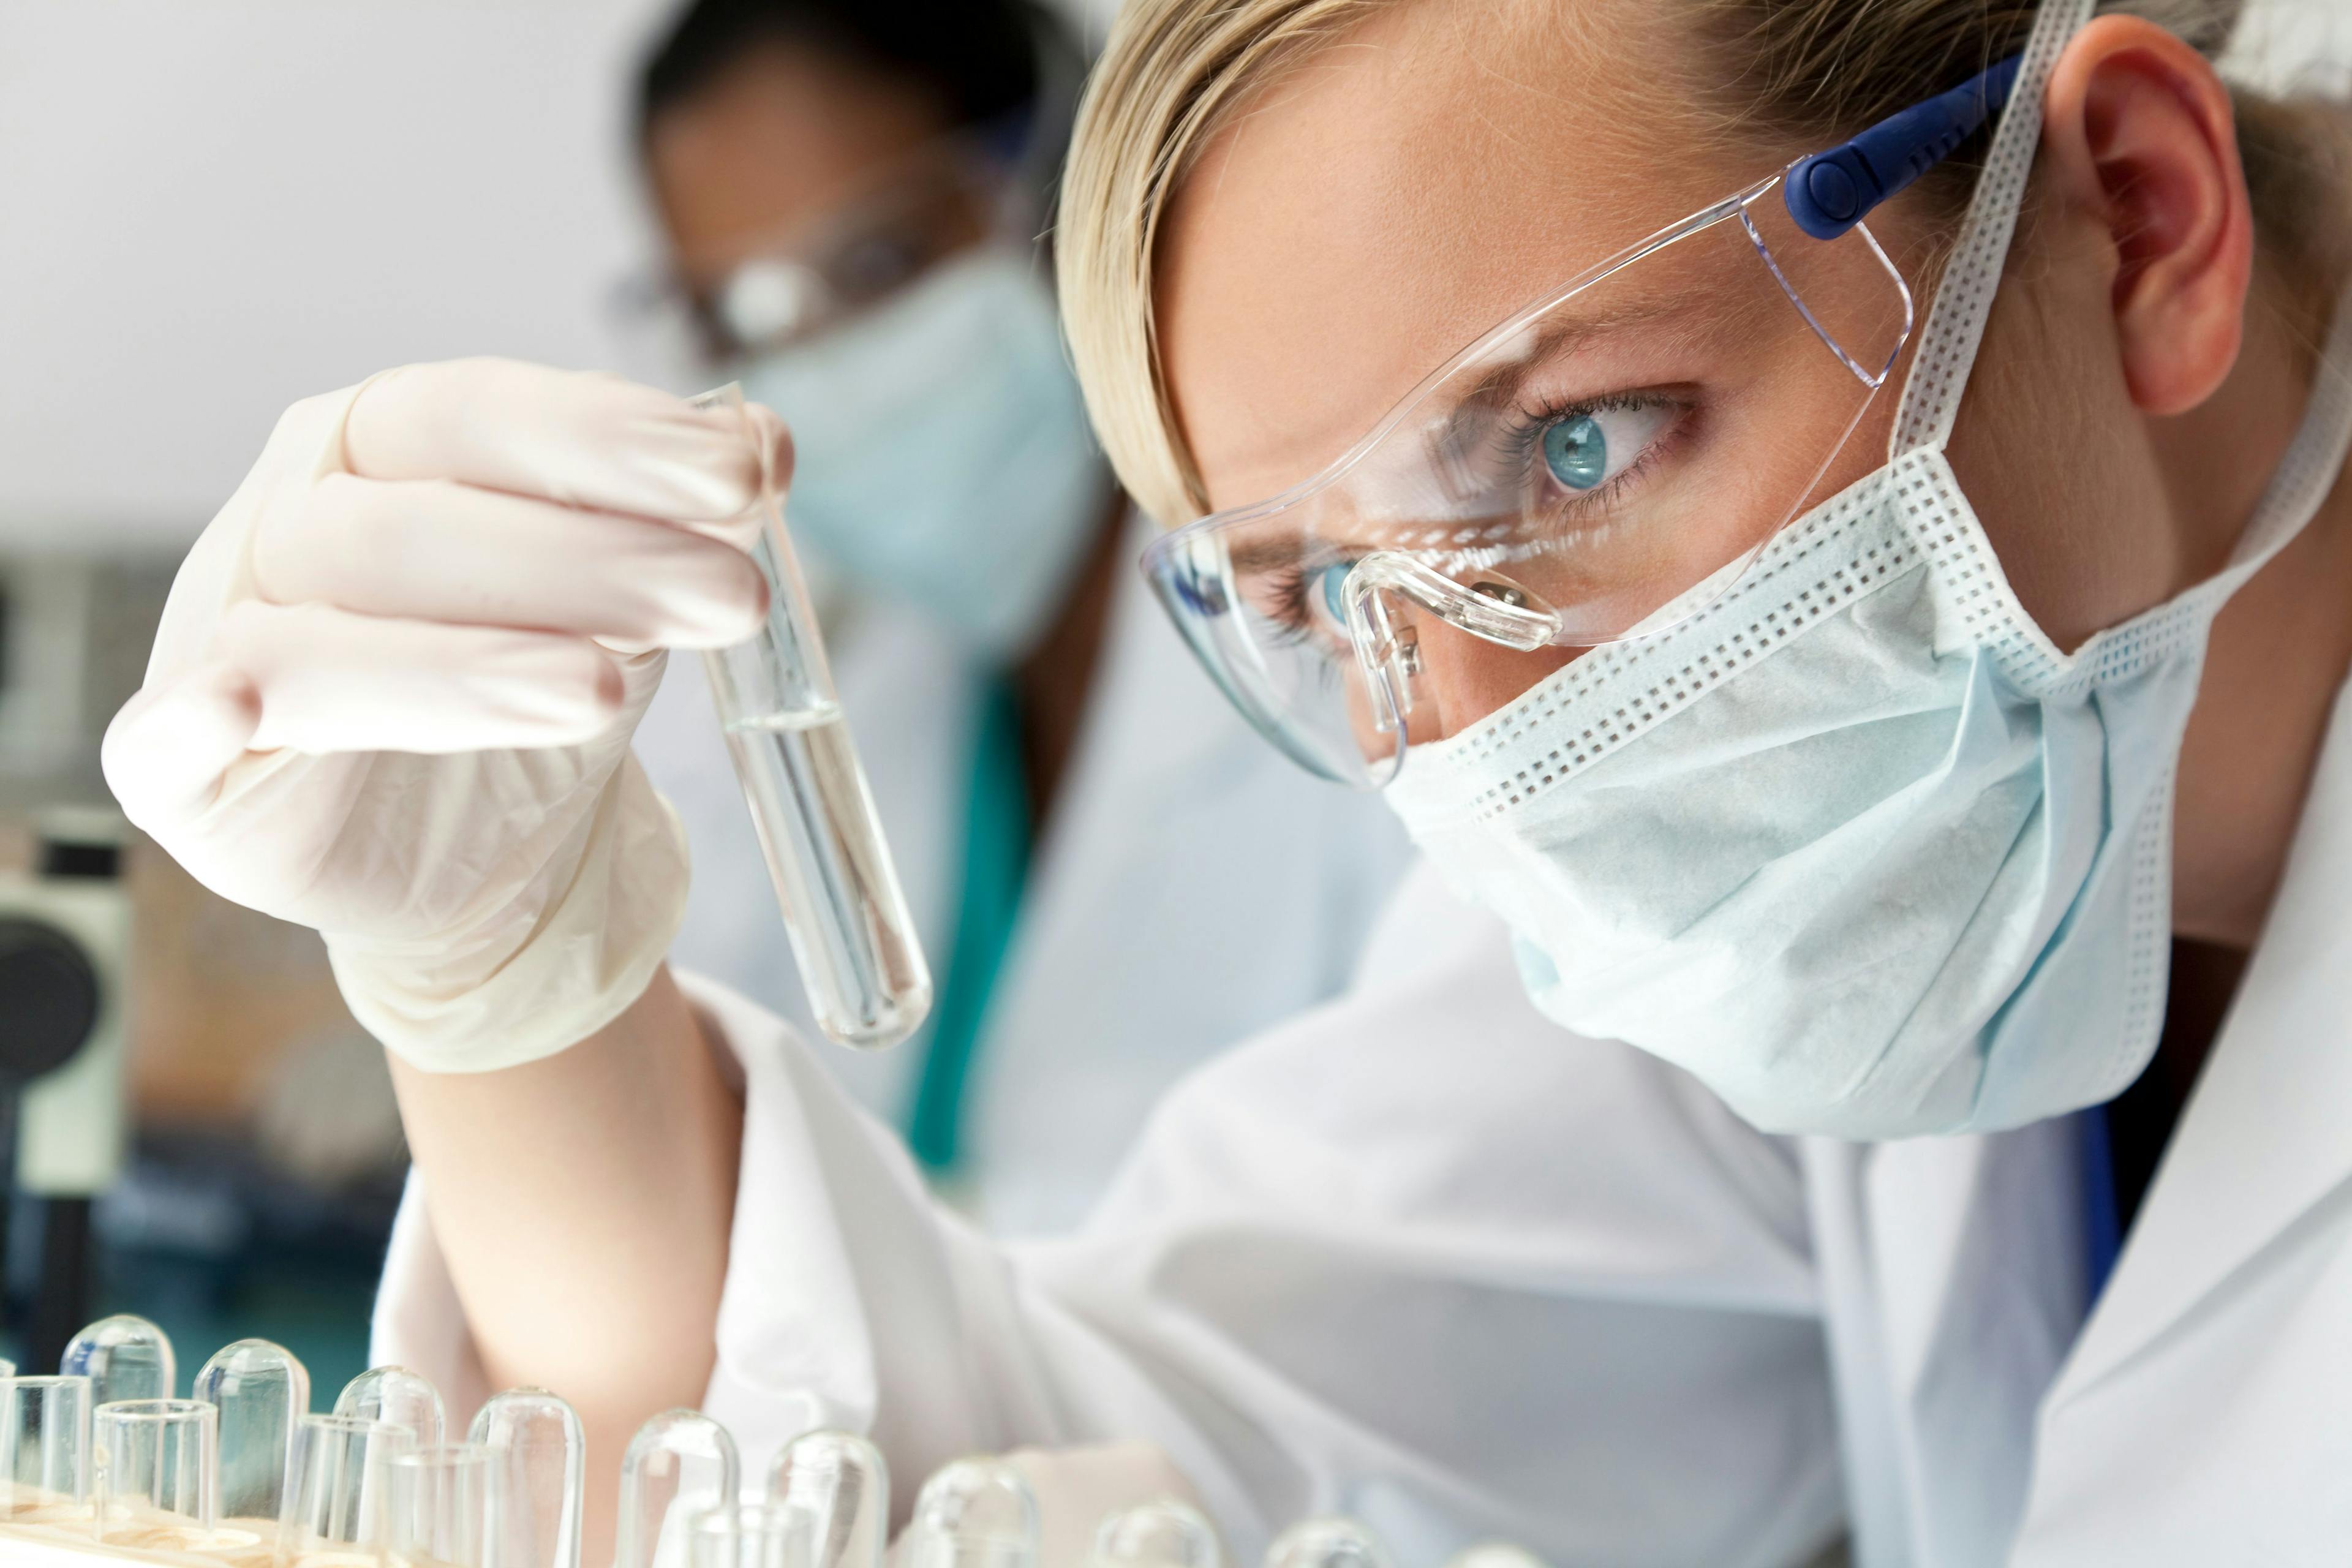 Akari Therapeutics' pre-clinical development work has been focused on engineering, evaluating and selecting the version of long-acting PAS-nomacopan that will achieve the maximum dose interval, while not sacrificing manufacturability, as well as securing our intellectual property. (Adobe Stock image)